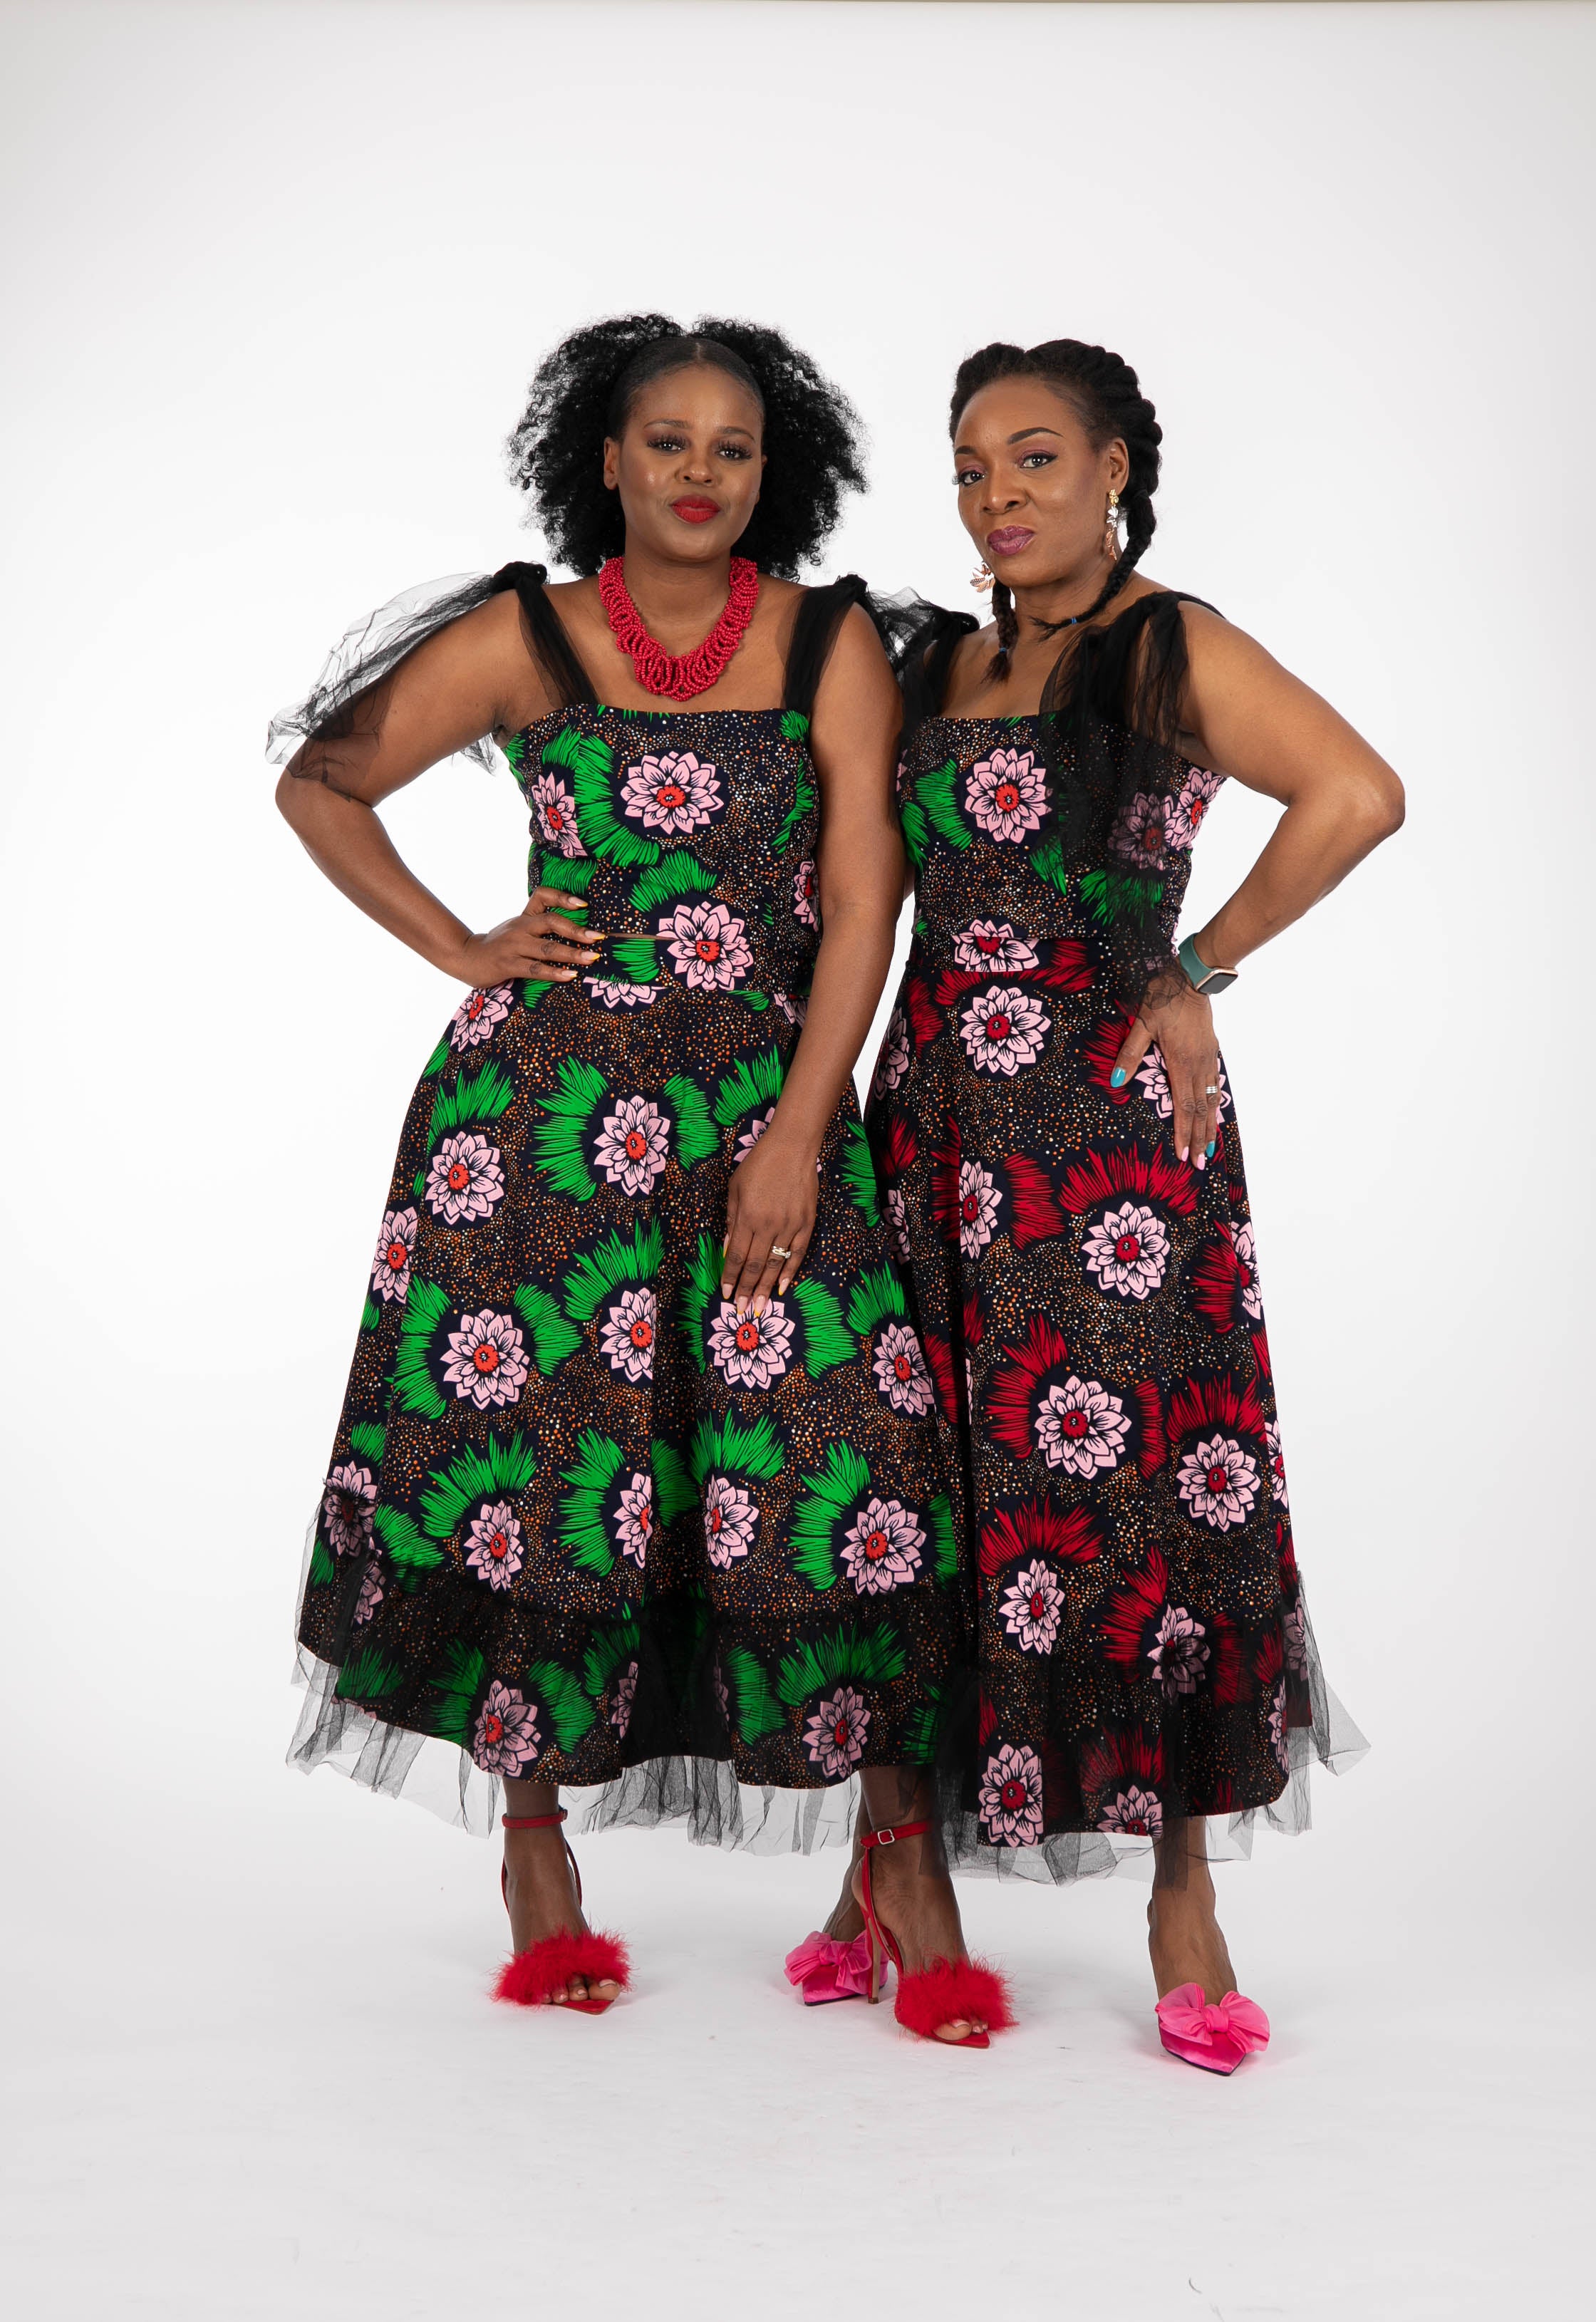 Temad collections Carino  african print ankara tulle circle skirt and crop top, Stylish African print skirts and tops, African print Ankara fabric, African tulle crop top, African crop top , African crop top , African print casual crop top , African crop top for ladies, African flared trousers, Ankara crop top, Ankara top, Ankara crop top, latest Ankara shorts, african floral shorts and tops, stylish african top,  african crop top matching skirt